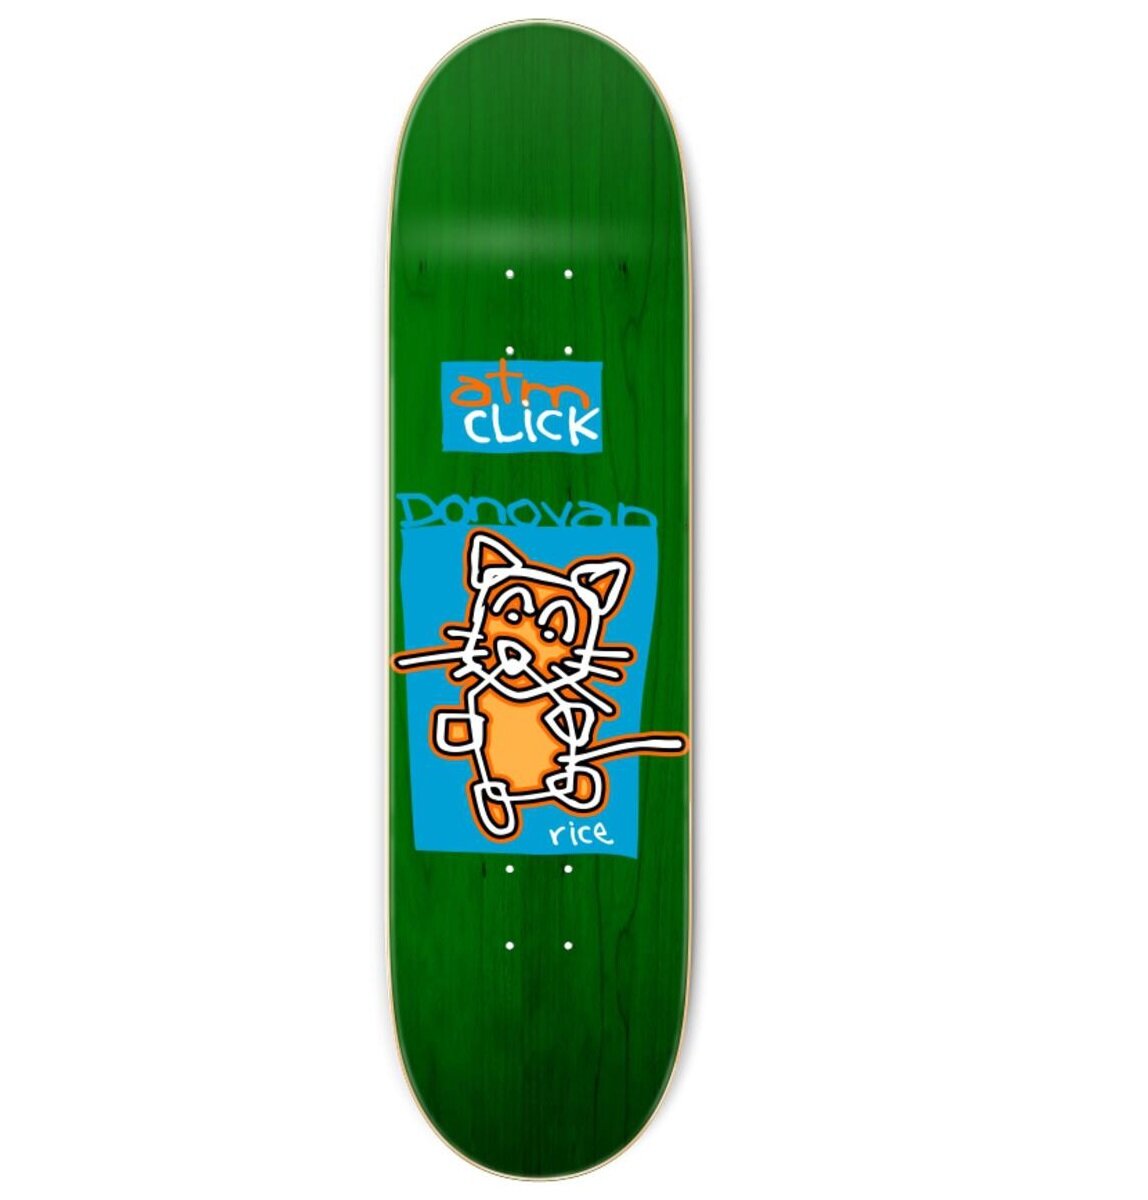 ATM Click Skateboards "Donovan Rice- Debut-Popsicle" Assorted Sized Deck